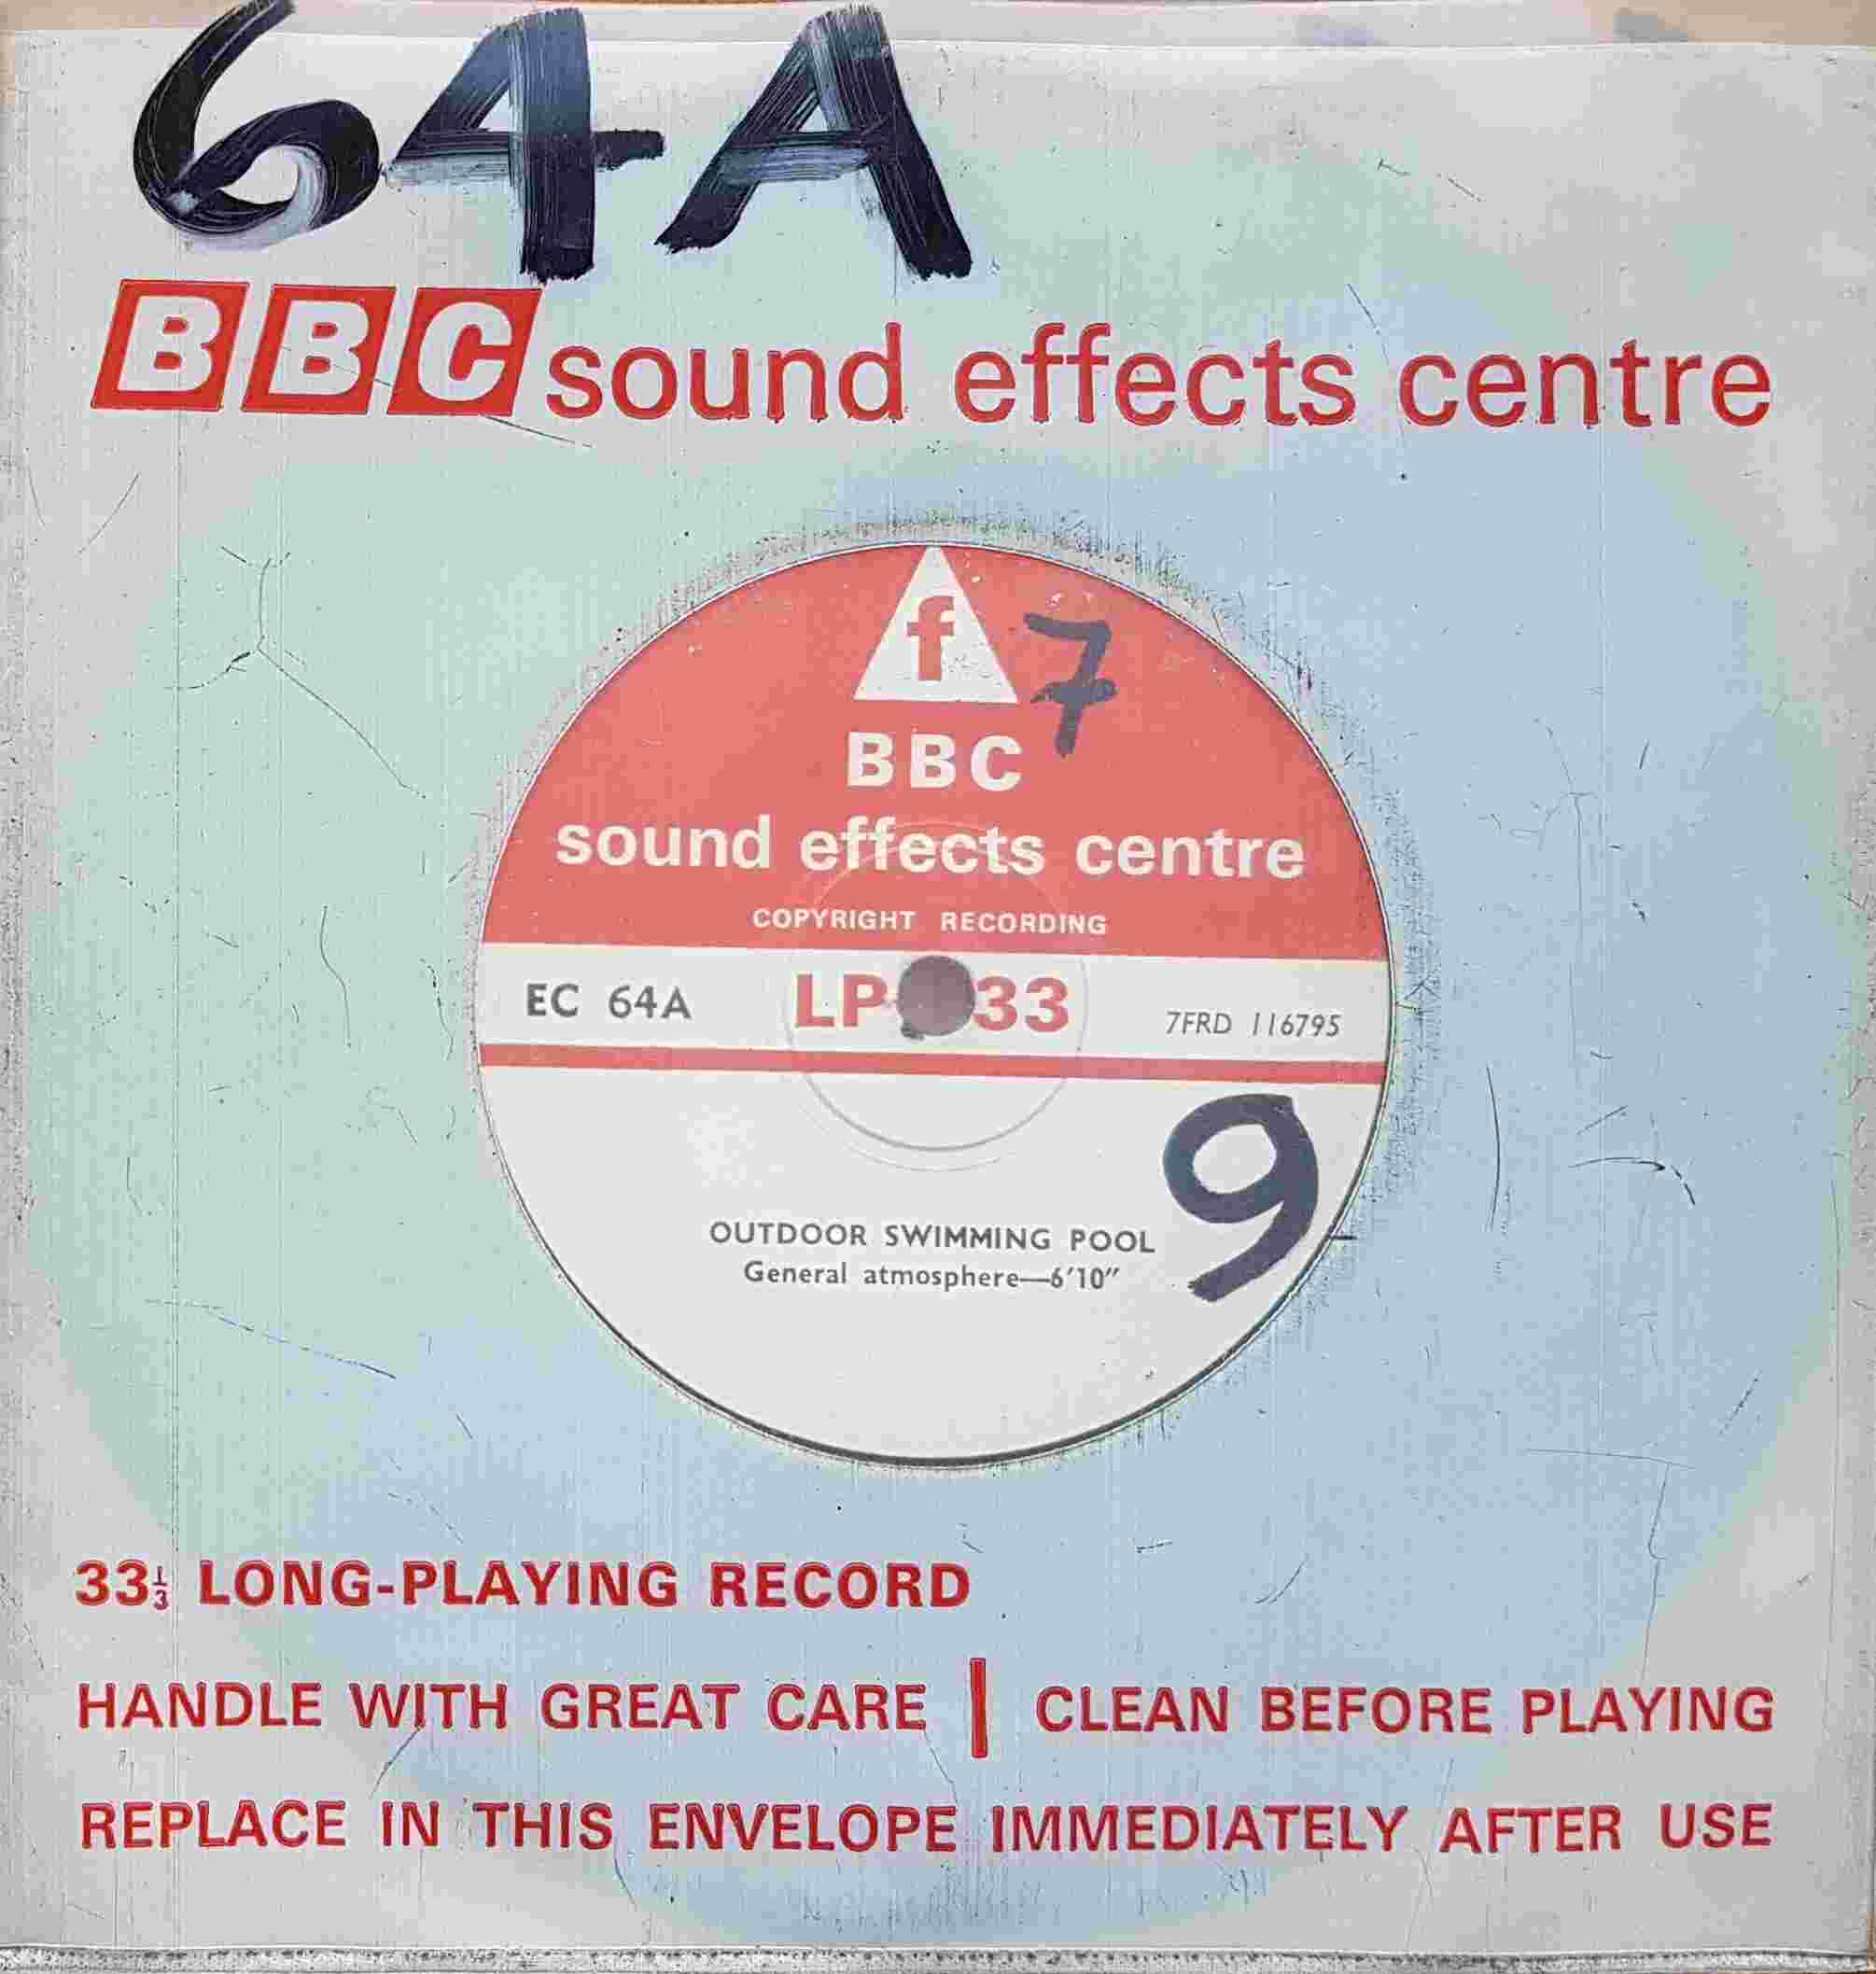 Picture of EC 64A Outdoor swimming pool by artist Not registered from the BBC singles - Records and Tapes library